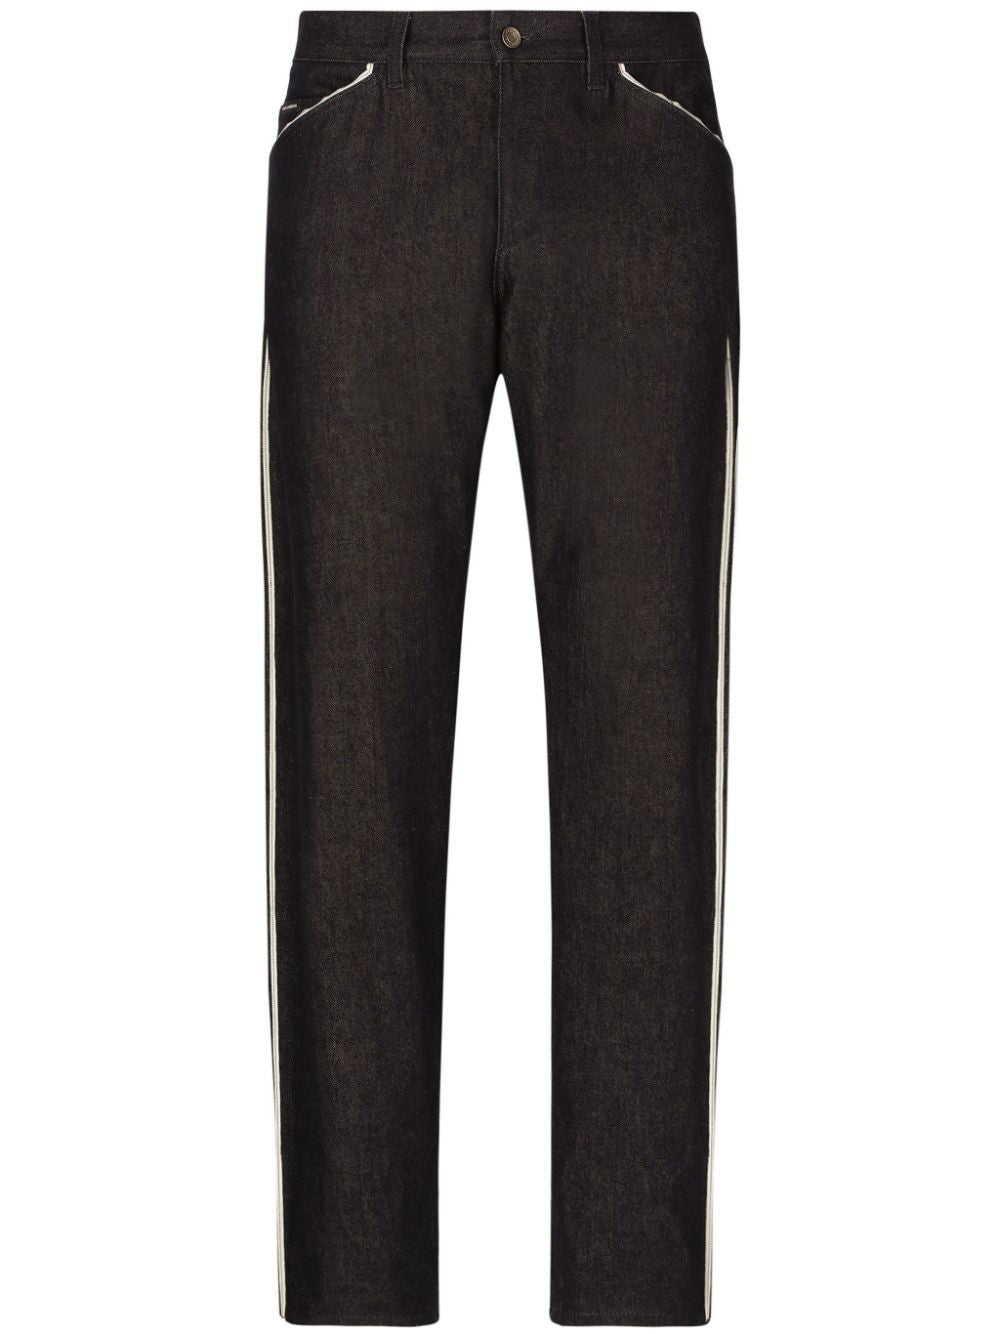 DOLCE & GABBANA Contemporary Piped Straight-Leg Jeans in Black and White